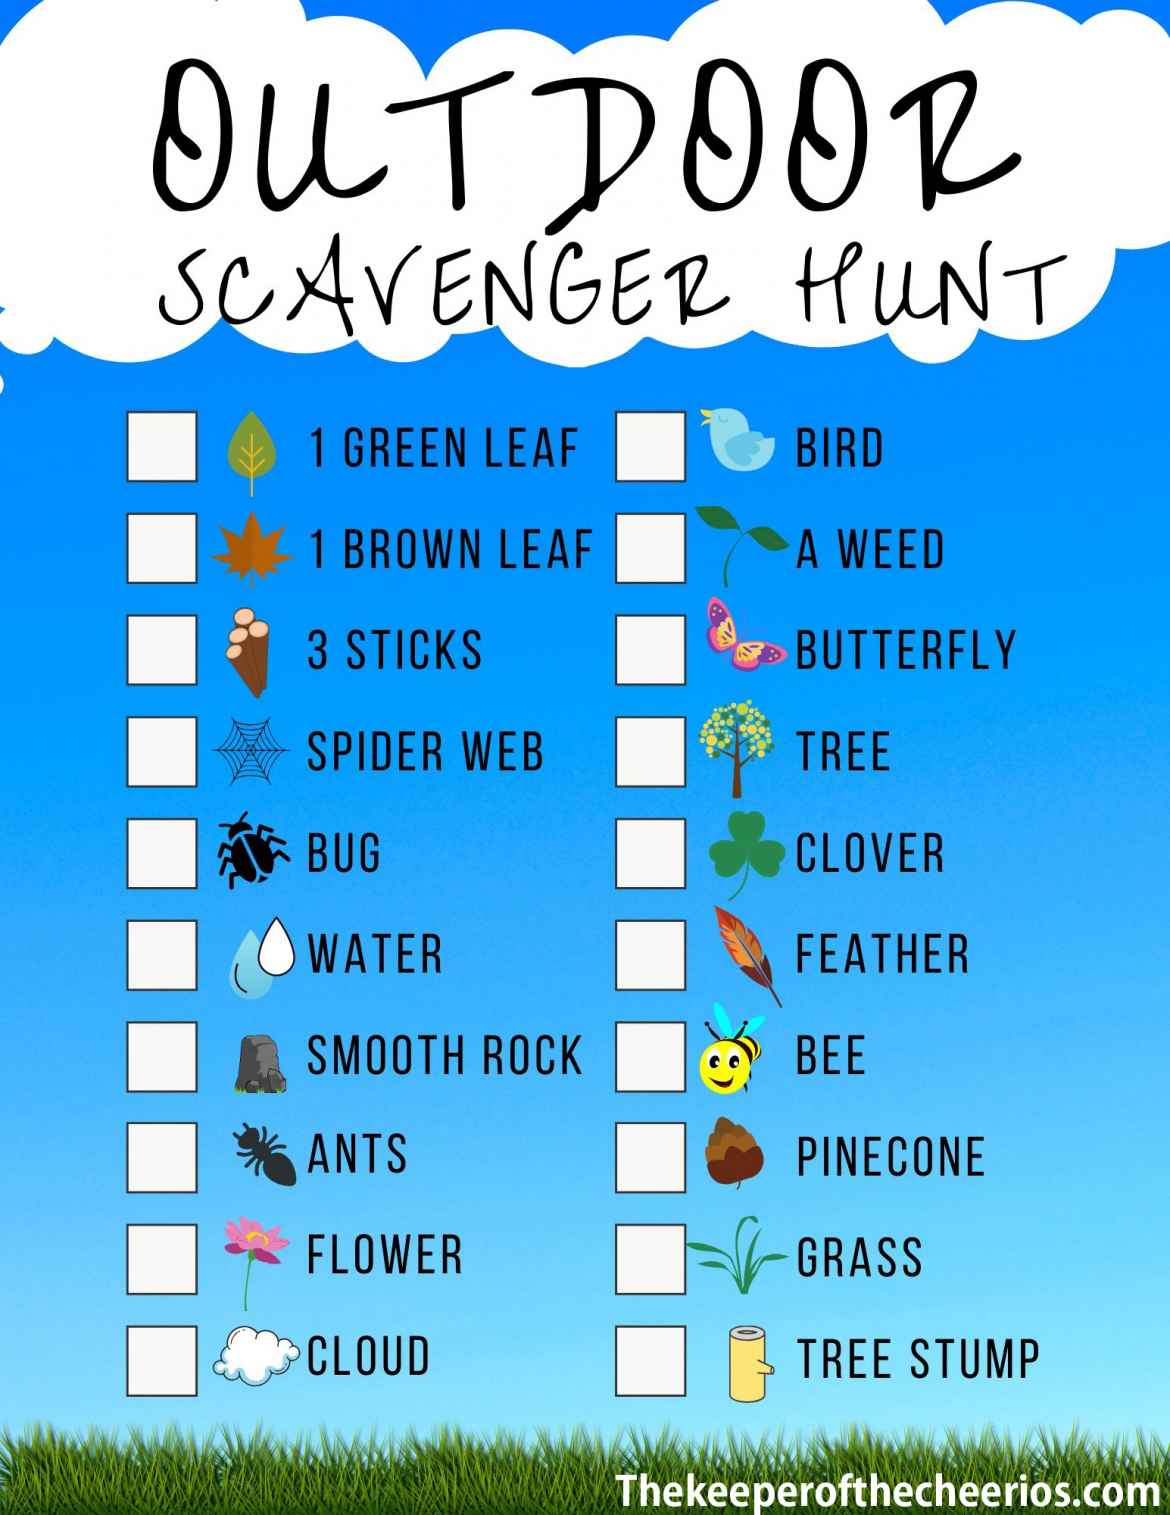 backyard-outdoor-scavenger-hunt-activity-sheet-the-keeper-of-the-cheerios